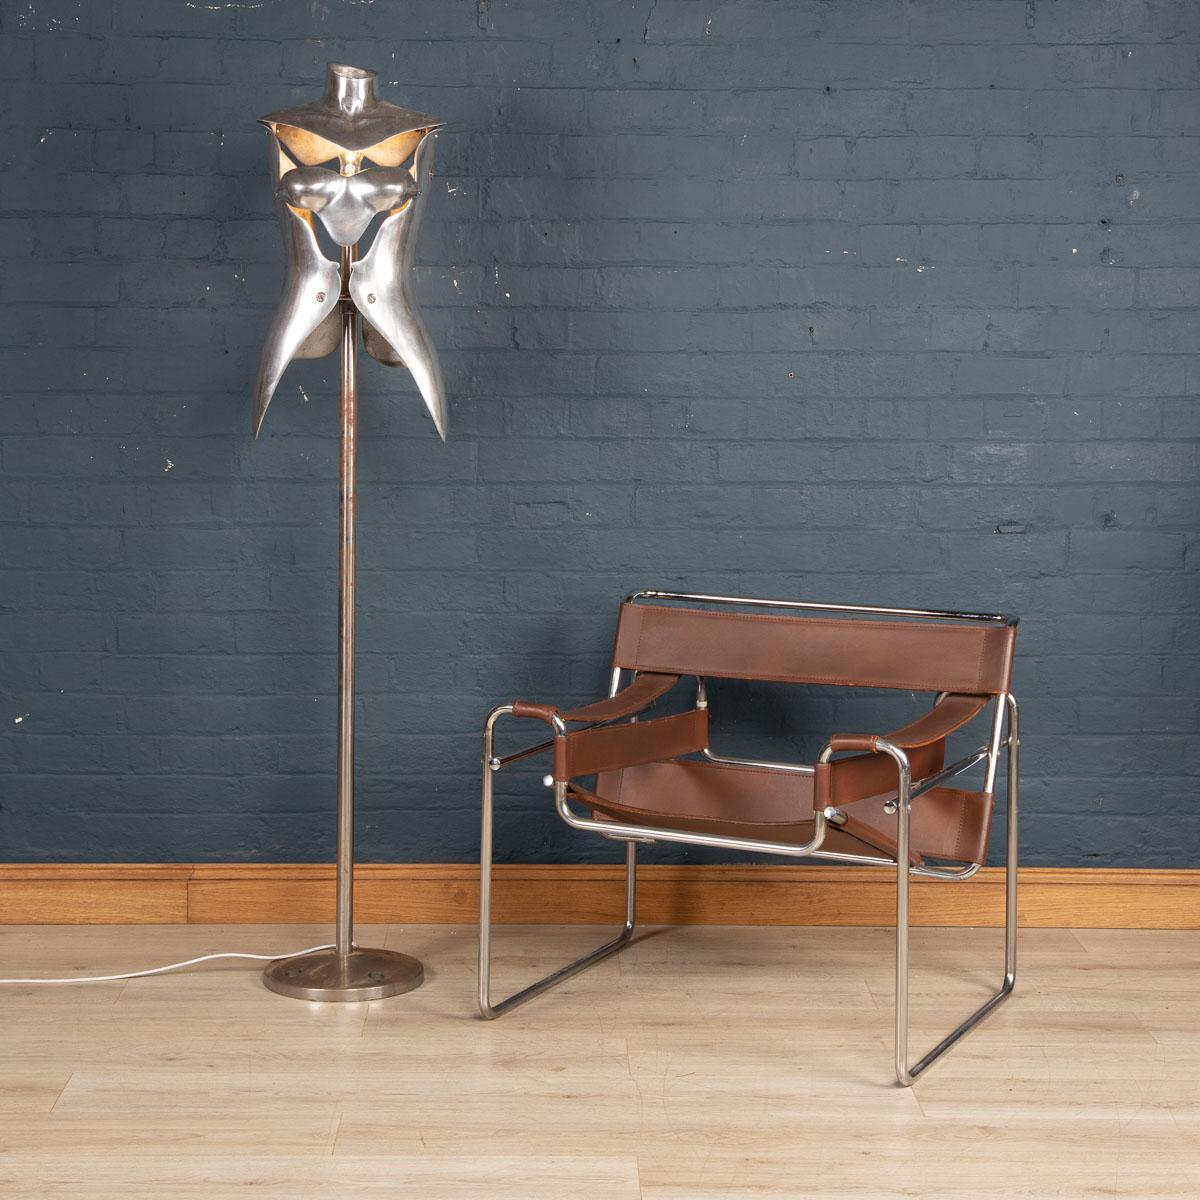 Stylish mannequin lamp designed by Nigel Coates, made for Jigsaw Clothing Company, Knightsbridge, London. Made in aluminum with sectional constructed torsos, wired bulb inside, these are some of the most striking design of mannequin ever